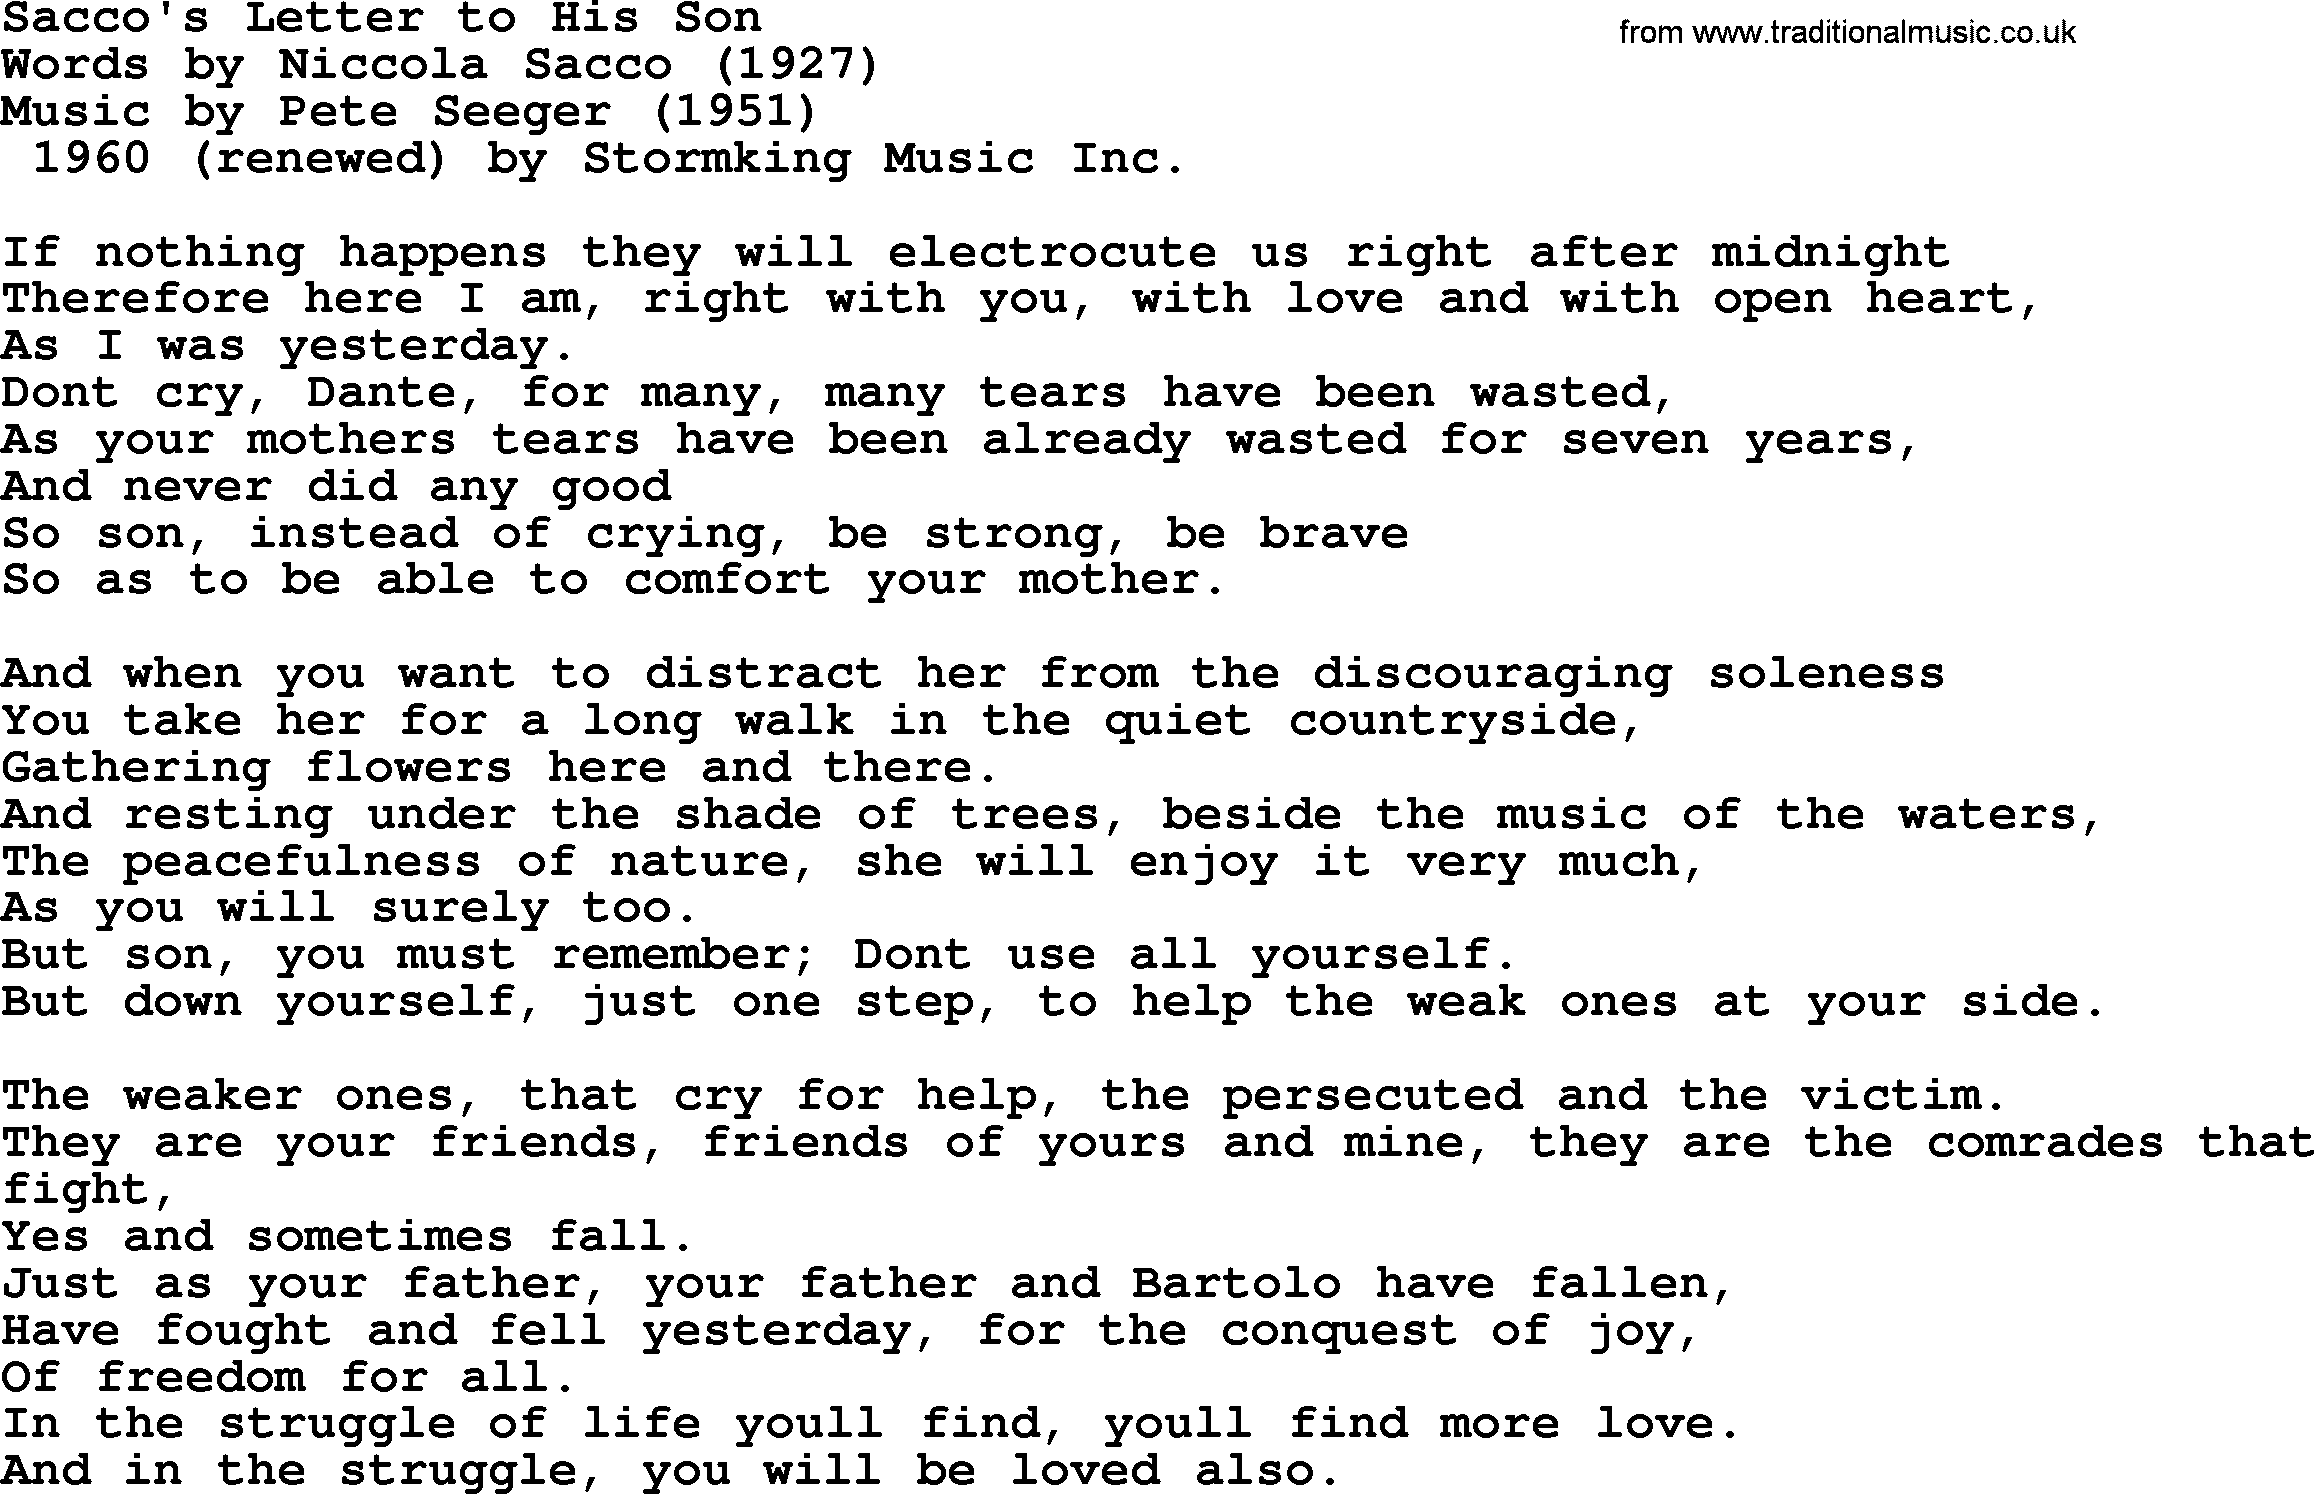 Pete Seeger song Sacco's Letter to His Son-Pete-Seeger.txt lyrics